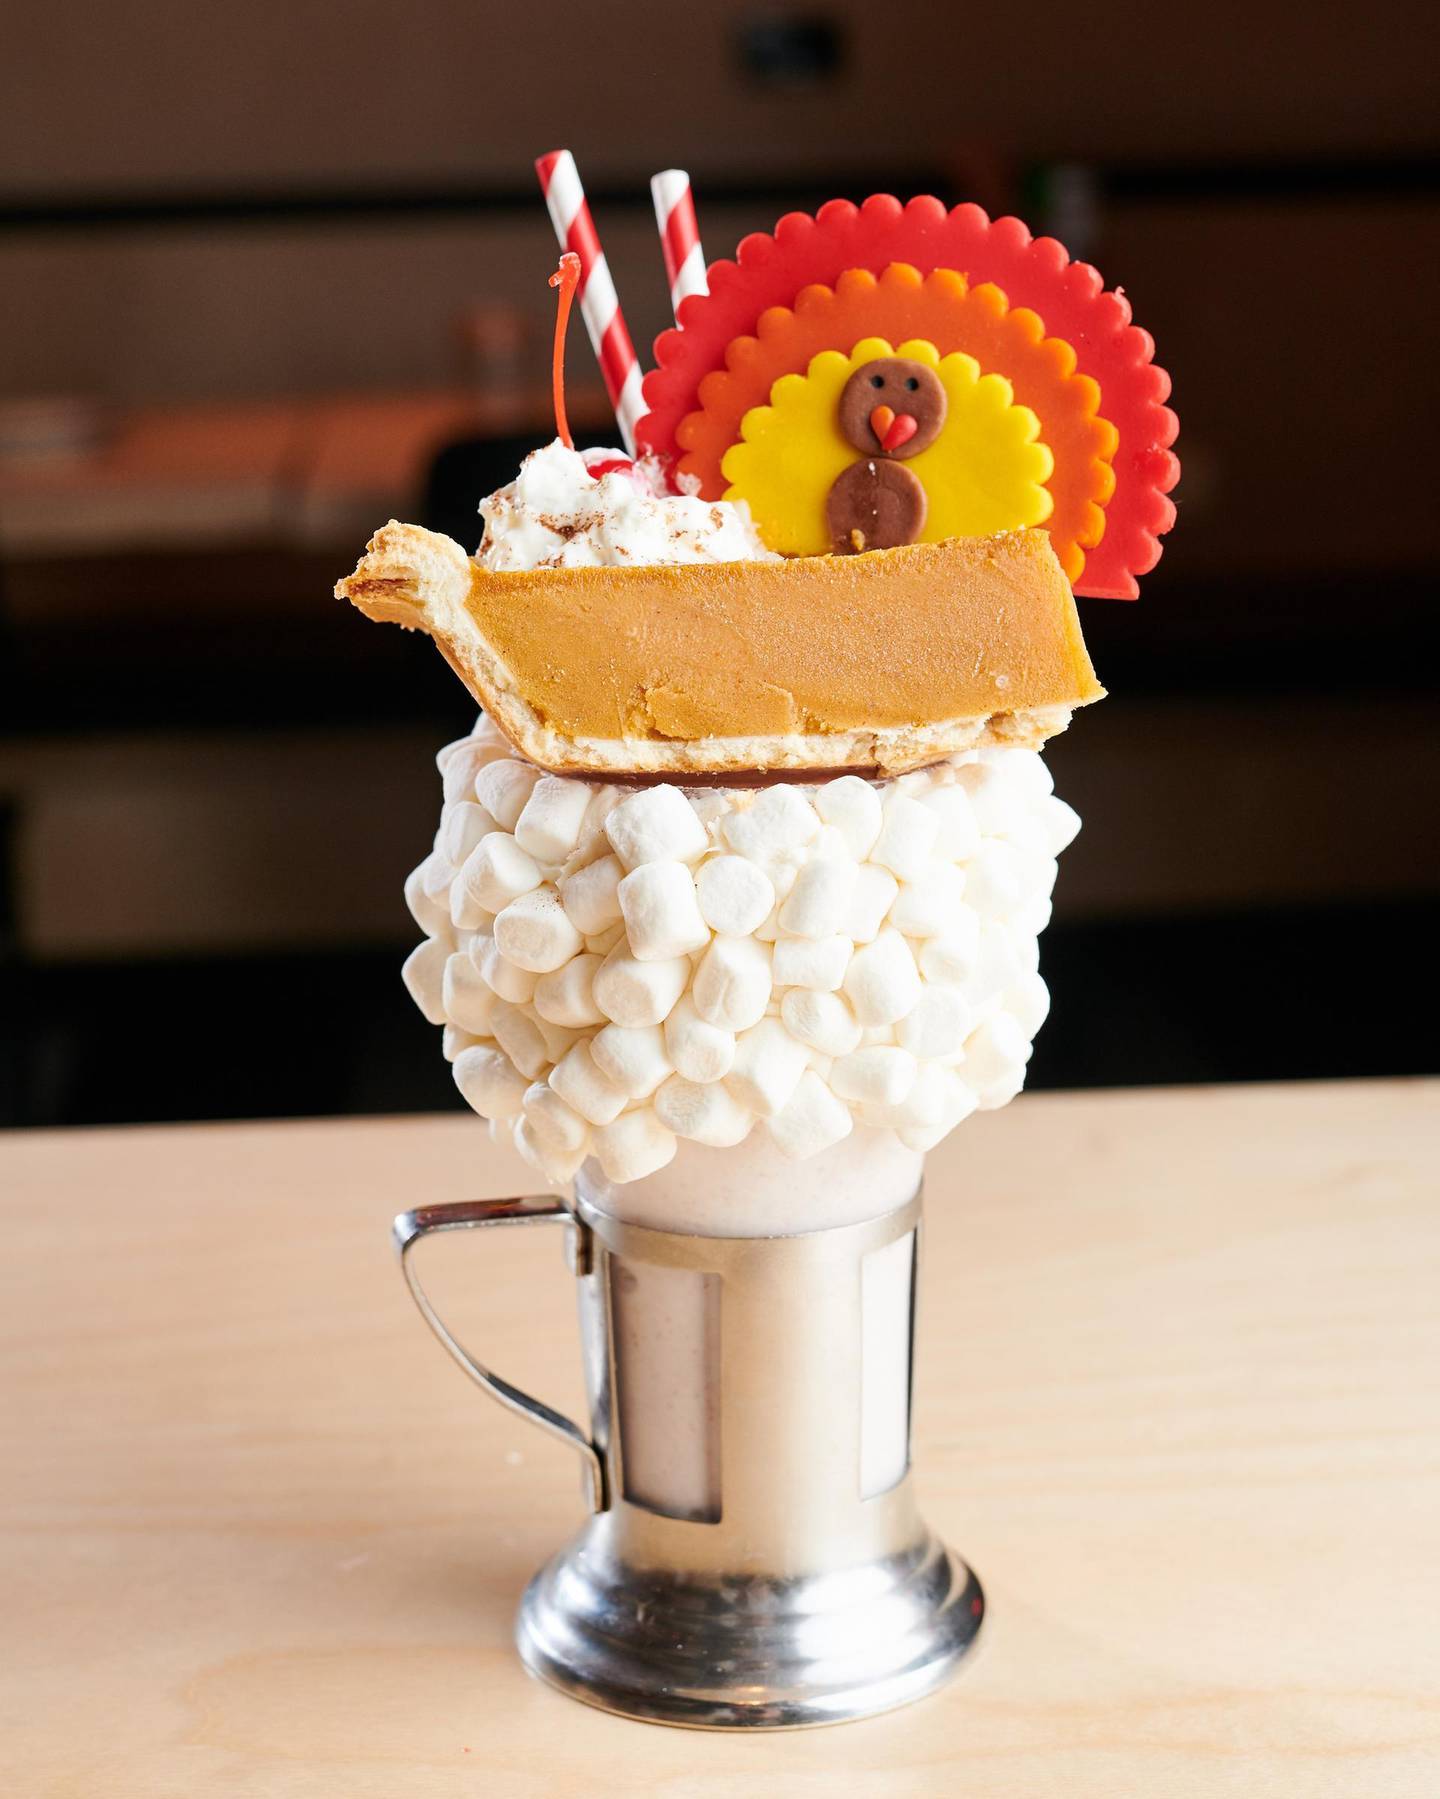 Black Tap's Pumpkin Pie CrazyShake will return for a limited time in November